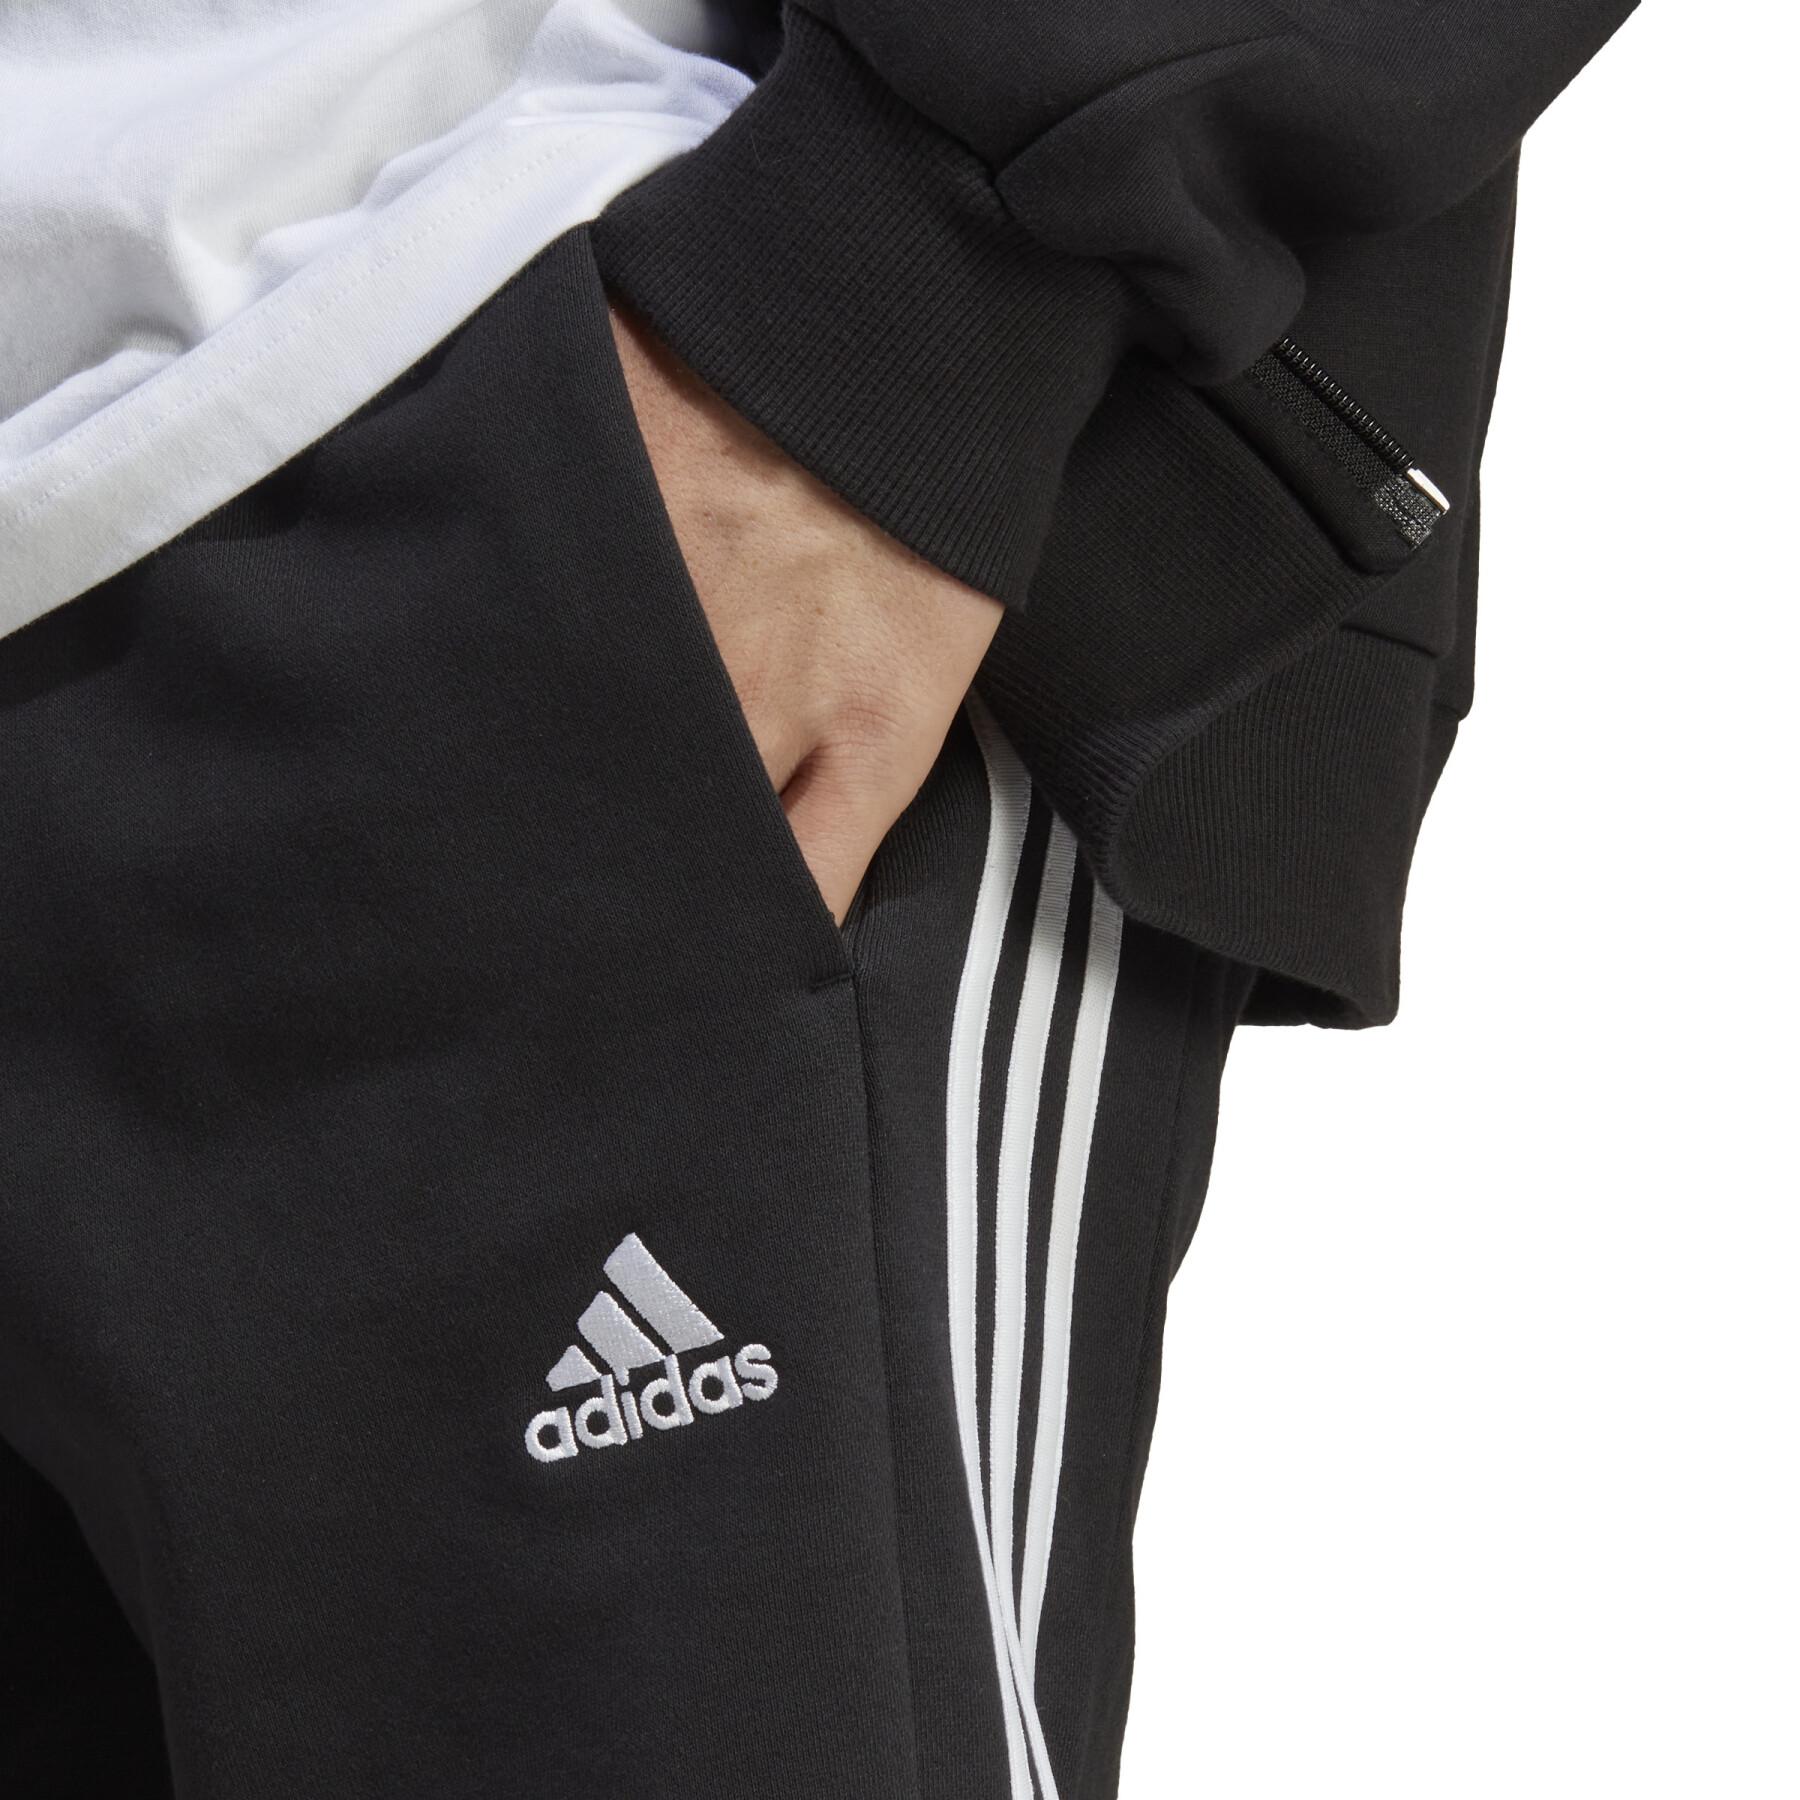 Shorts at adidas 3-Stripes Essentials French Terry